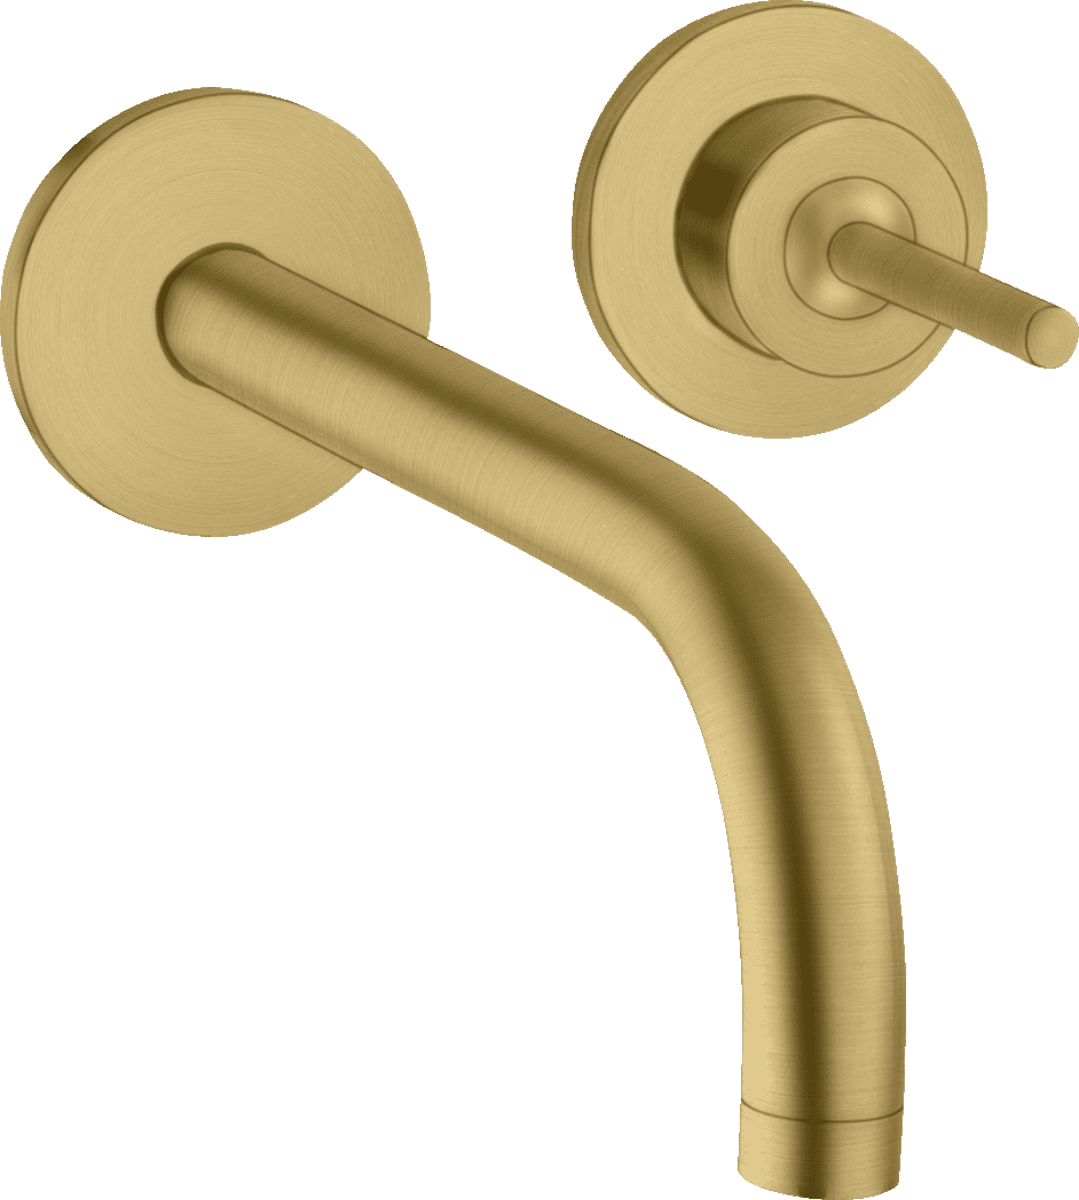 Picture of HANSGROHE AXOR Uno Single lever basin mixer for concealed installation wall-mounted with spout 225 mm and escutcheons #38116250 - Brushed Gold Optic